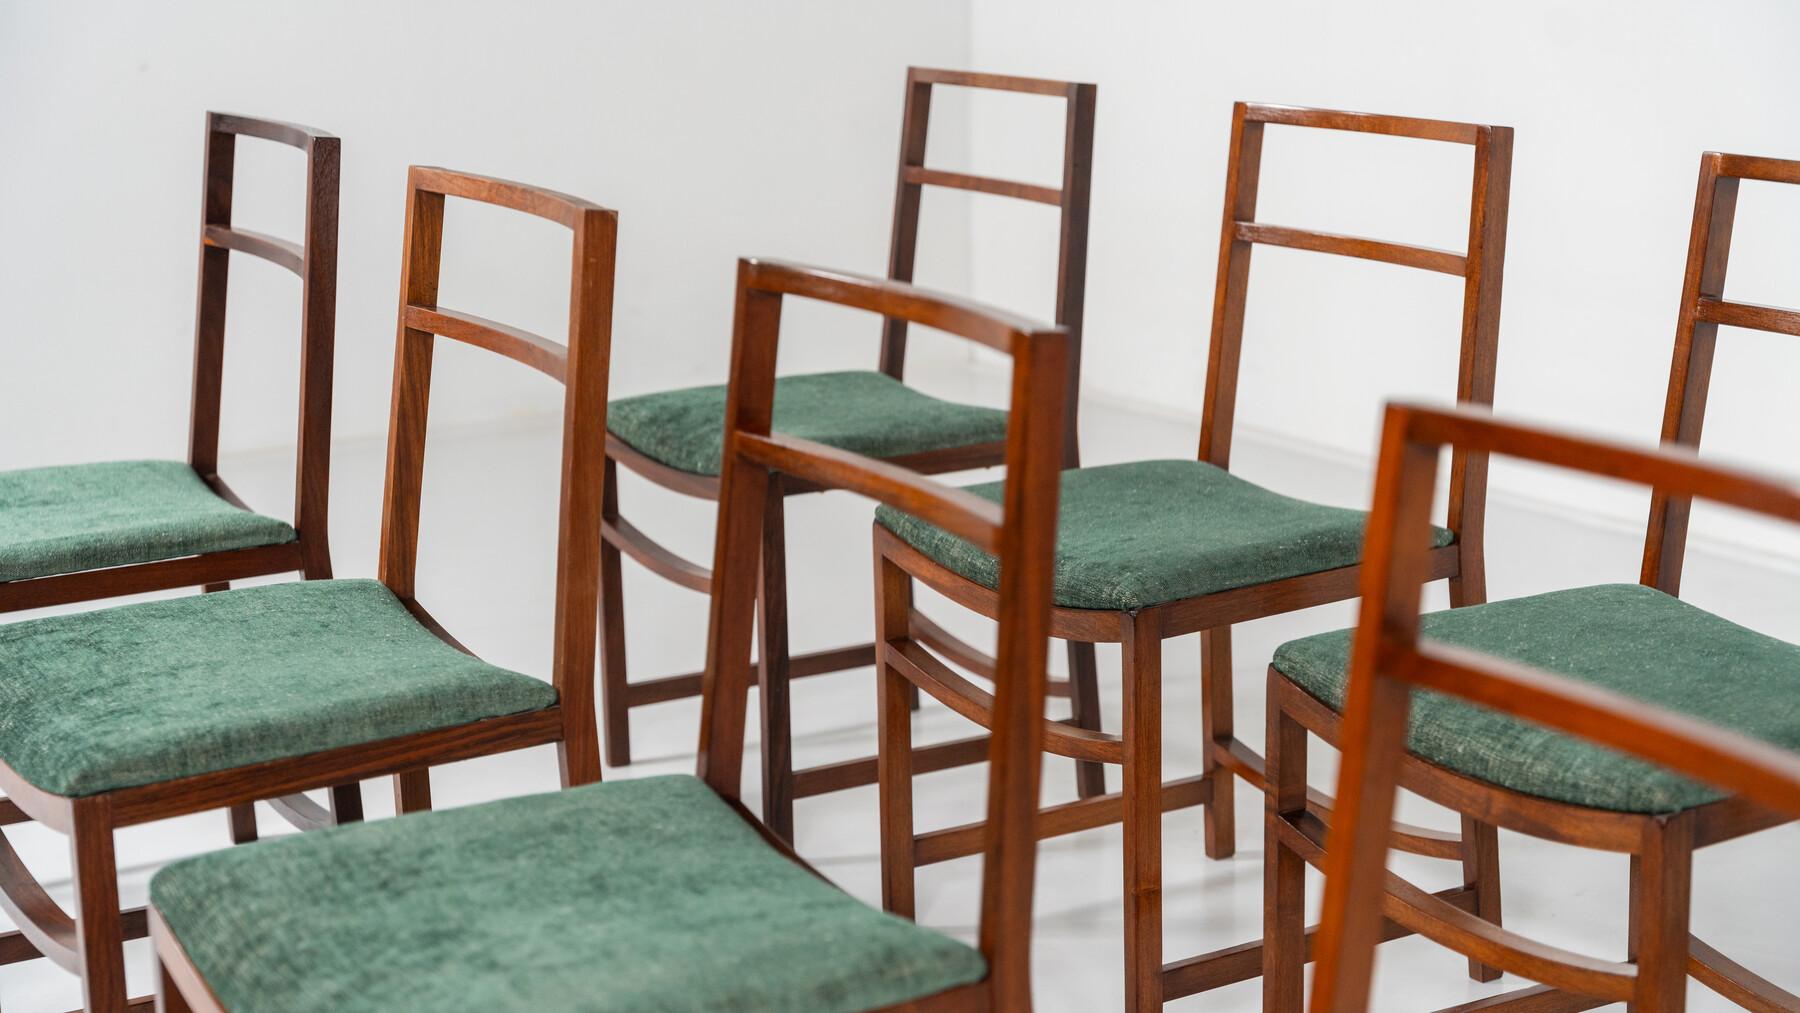 Set of 8 Mid-Century Modern Dining Chairs by Renato Venturi for MIM, 1950s For Sale 3